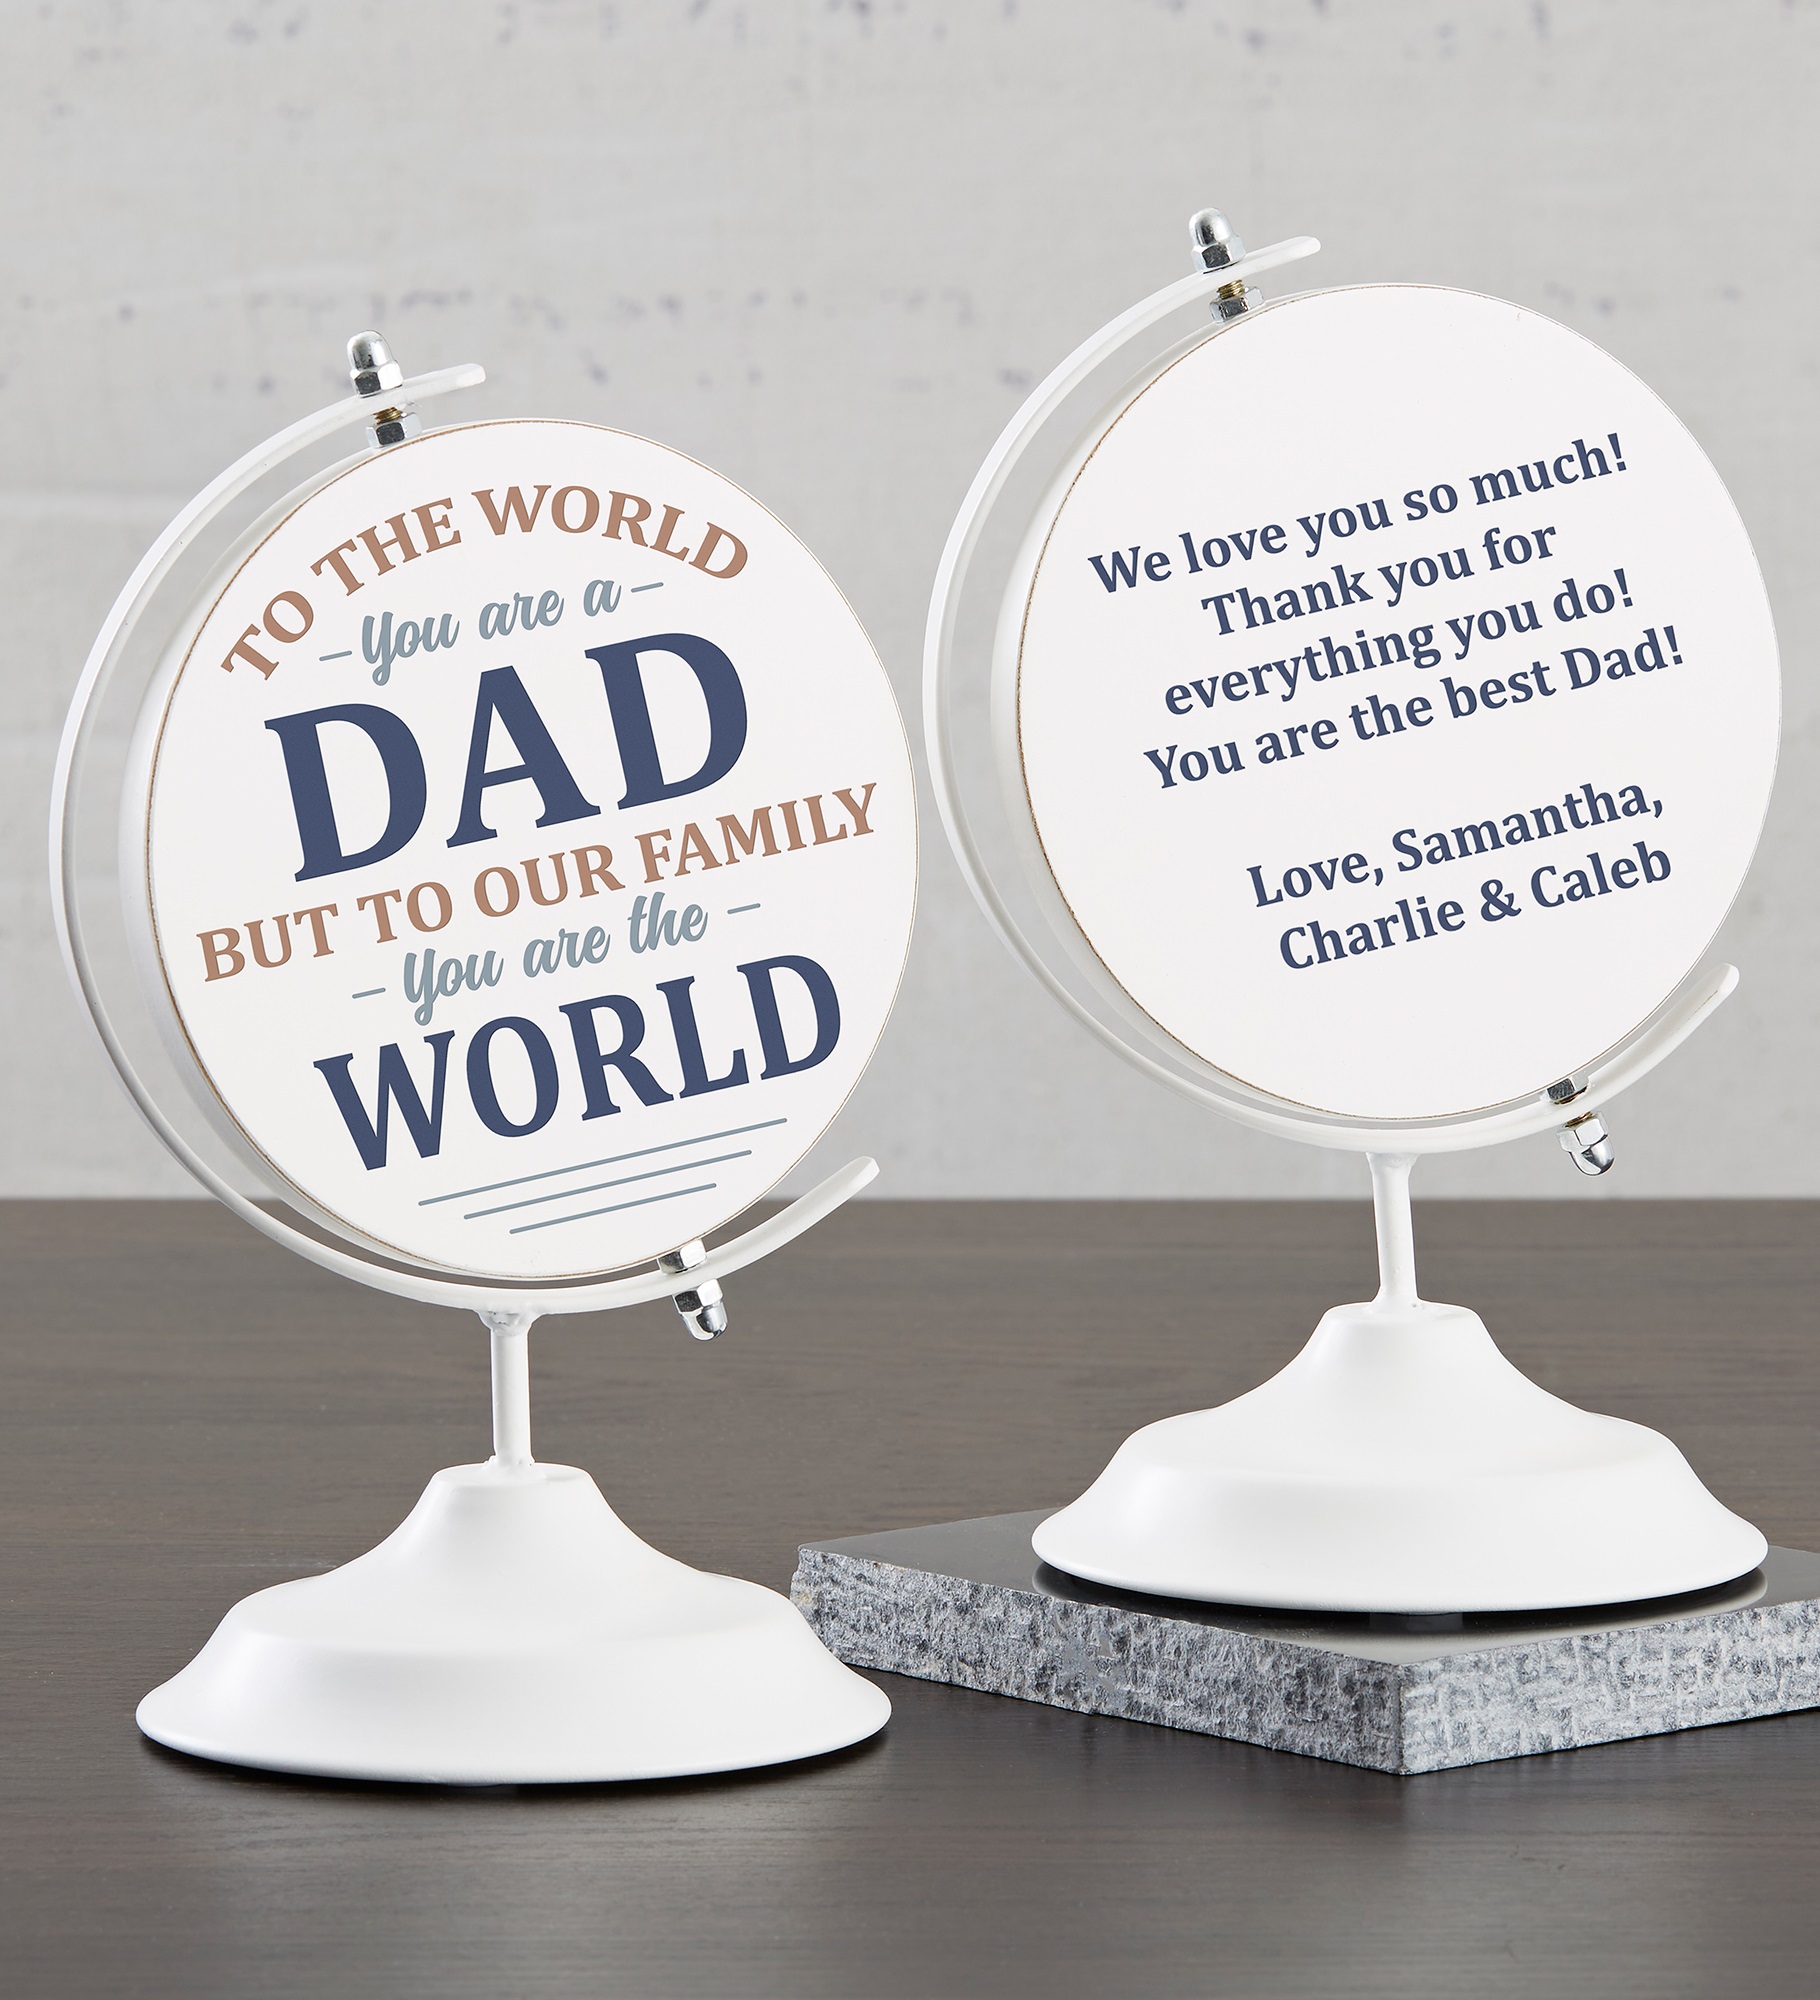 You are the World Personalized Wooden Decorative Globe for Dad